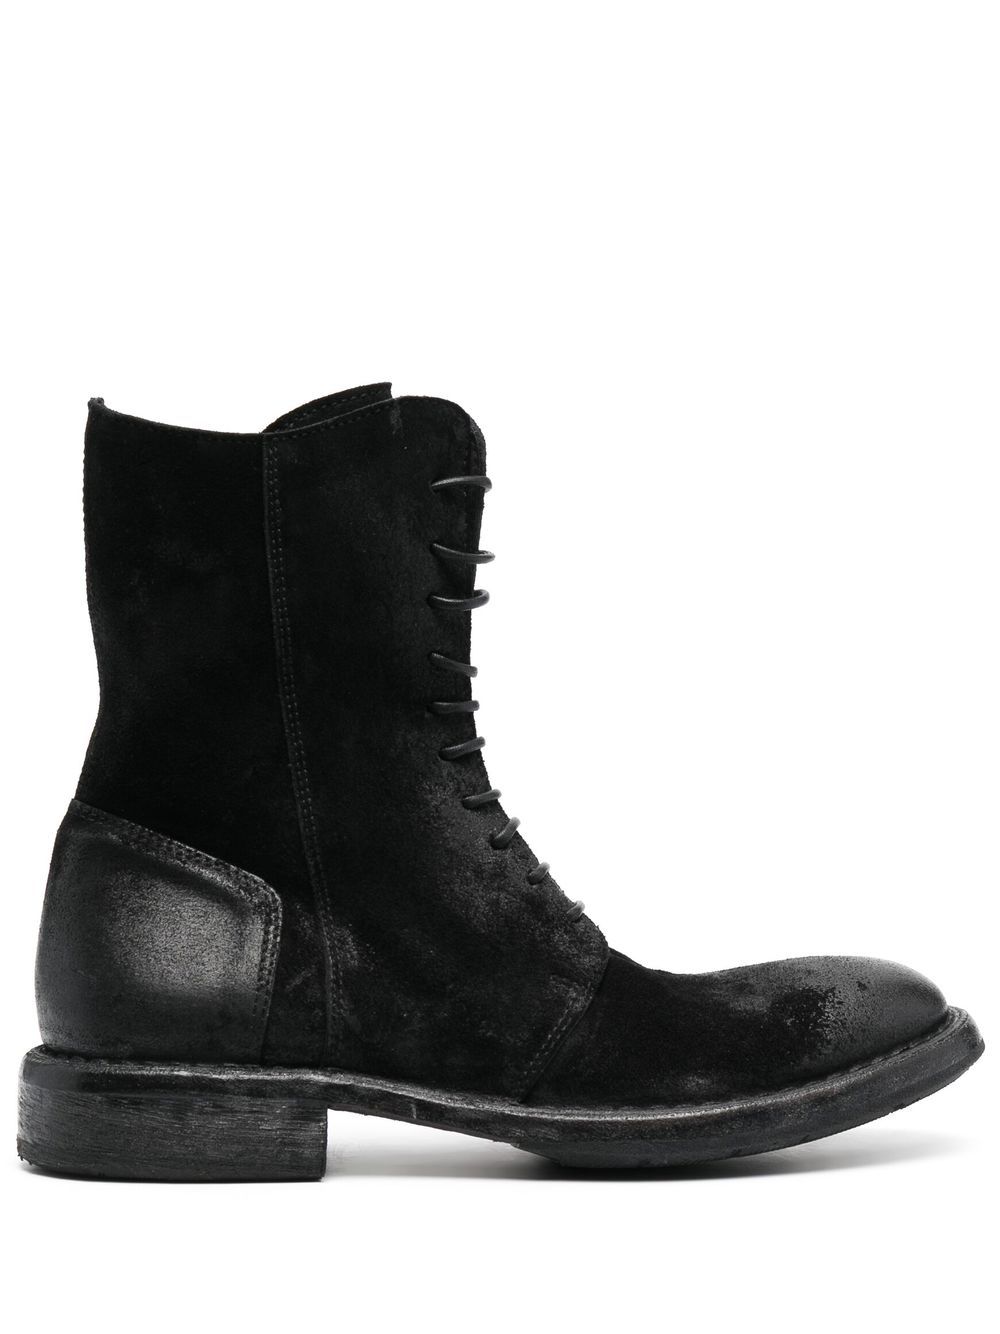 Moma Polacco worn-effect leather boots - Black von Moma